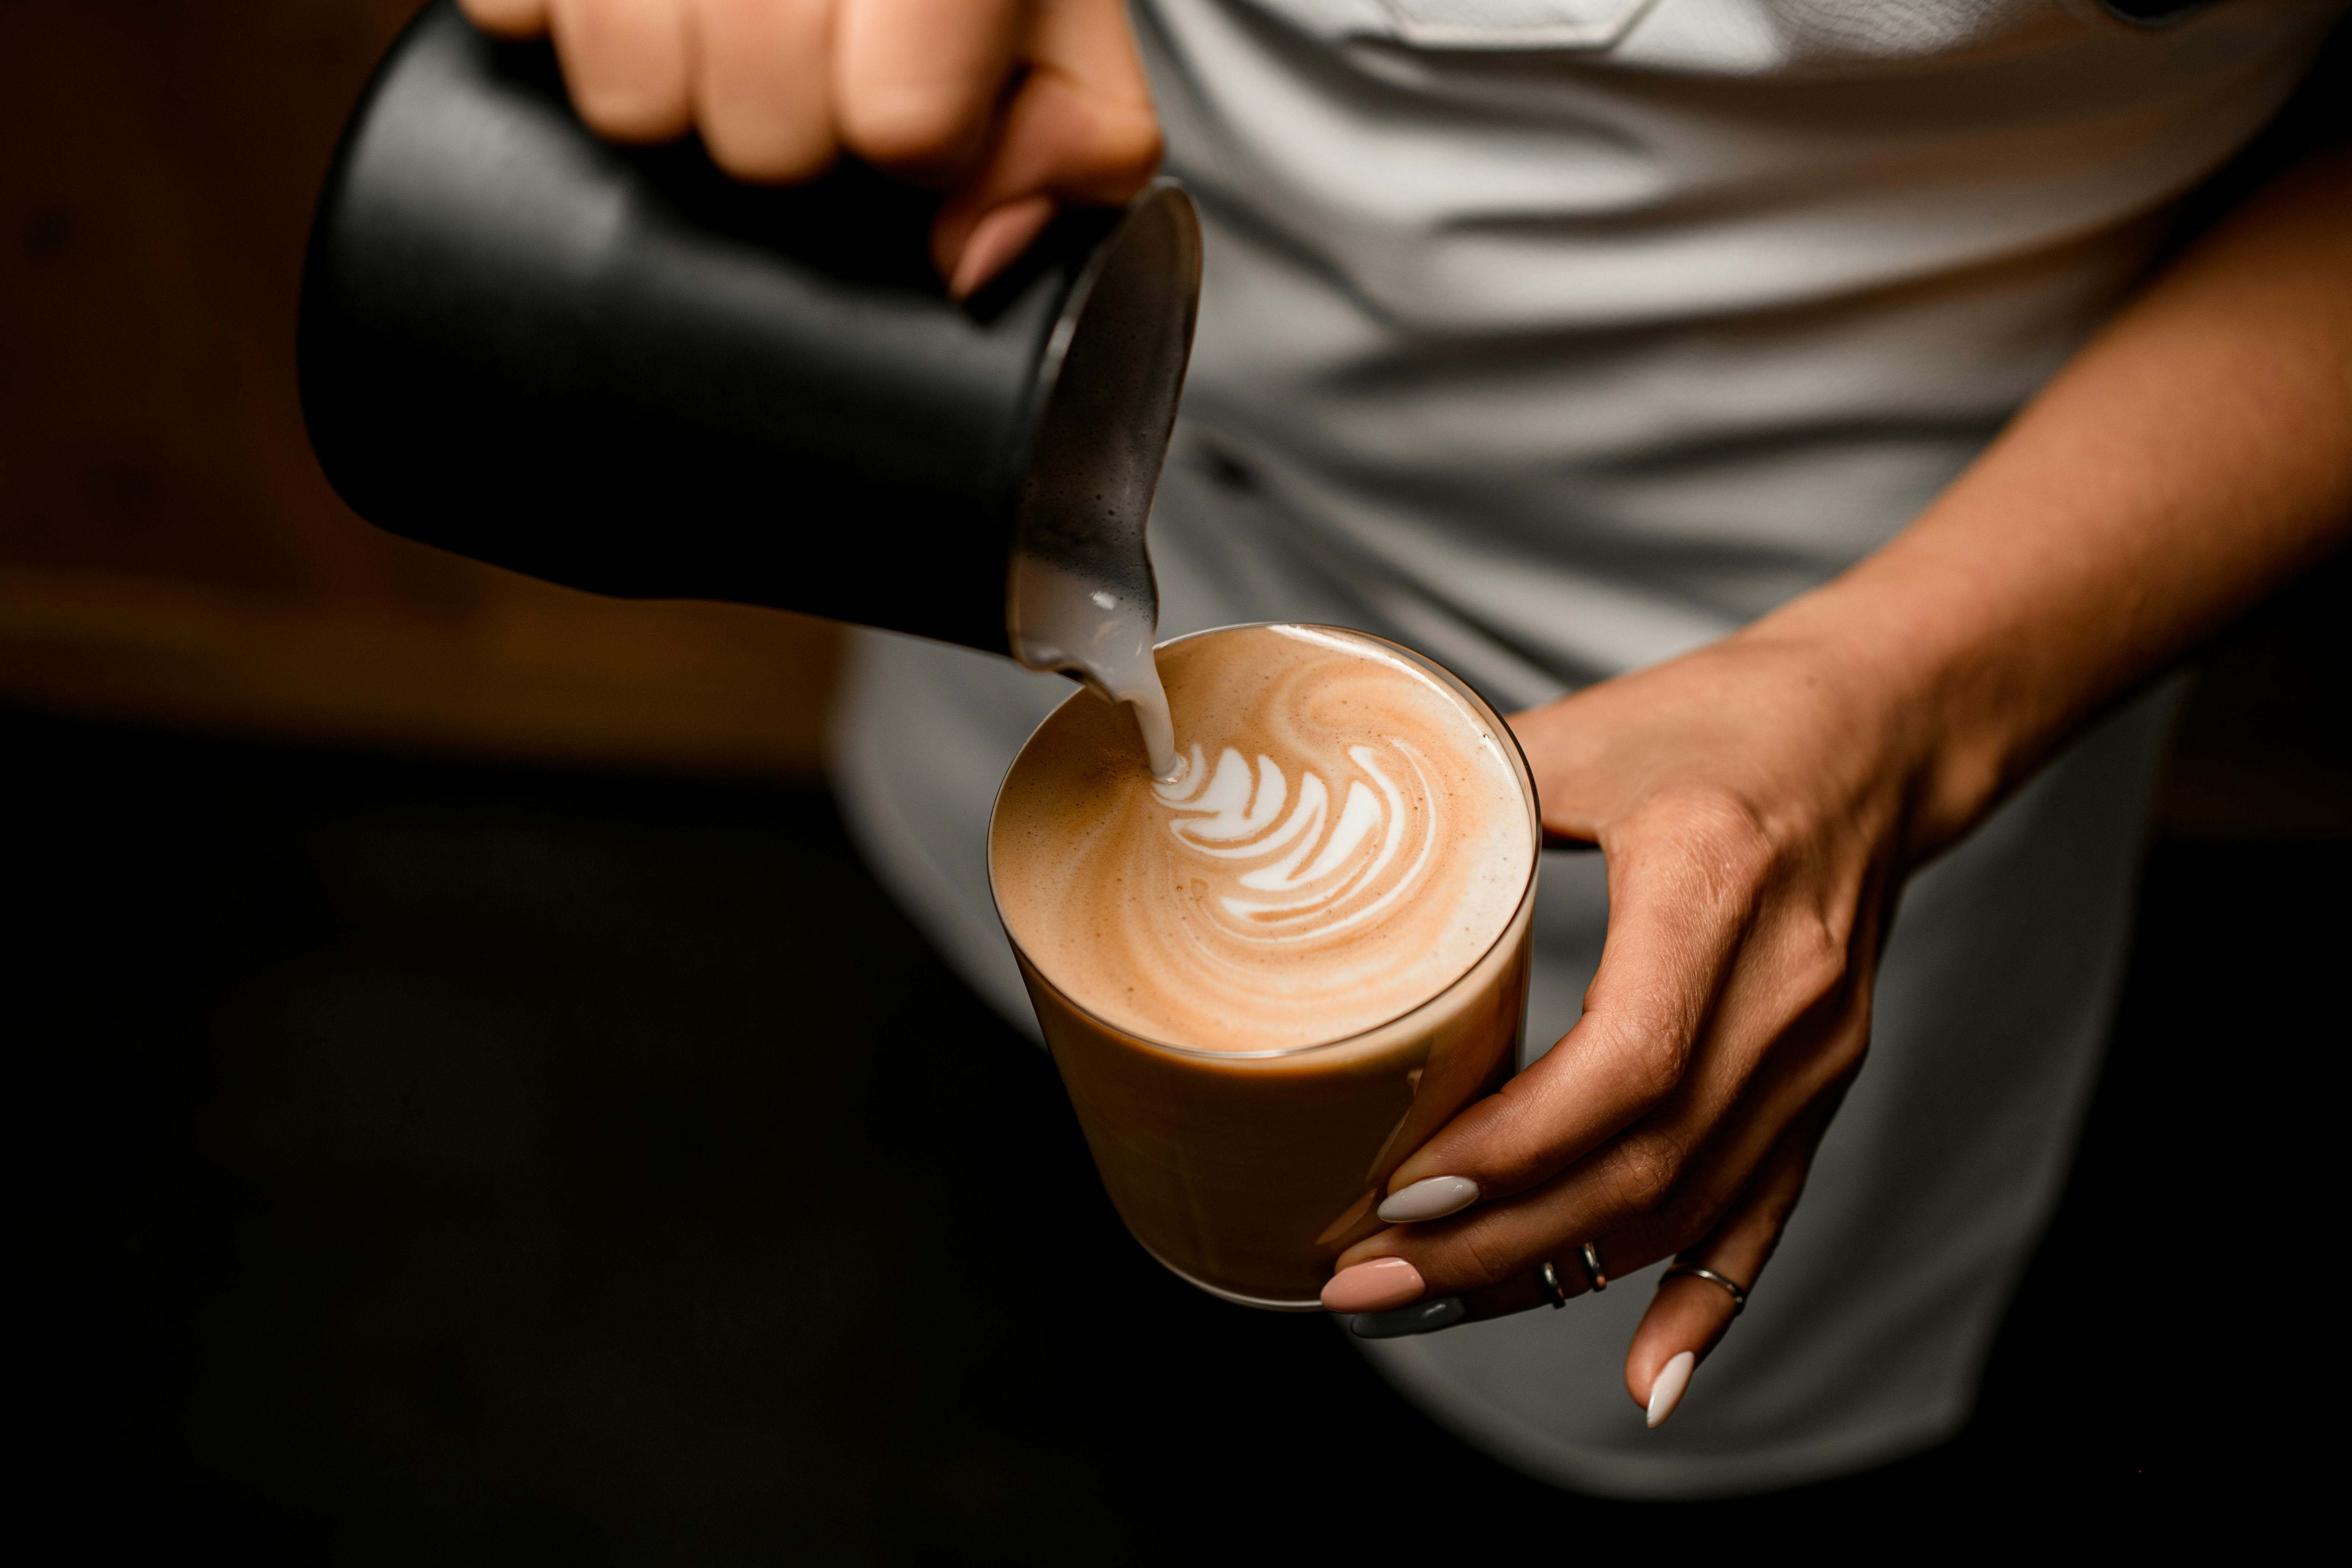 A person is pouring cream onto a cup of coffee, making coffee art.